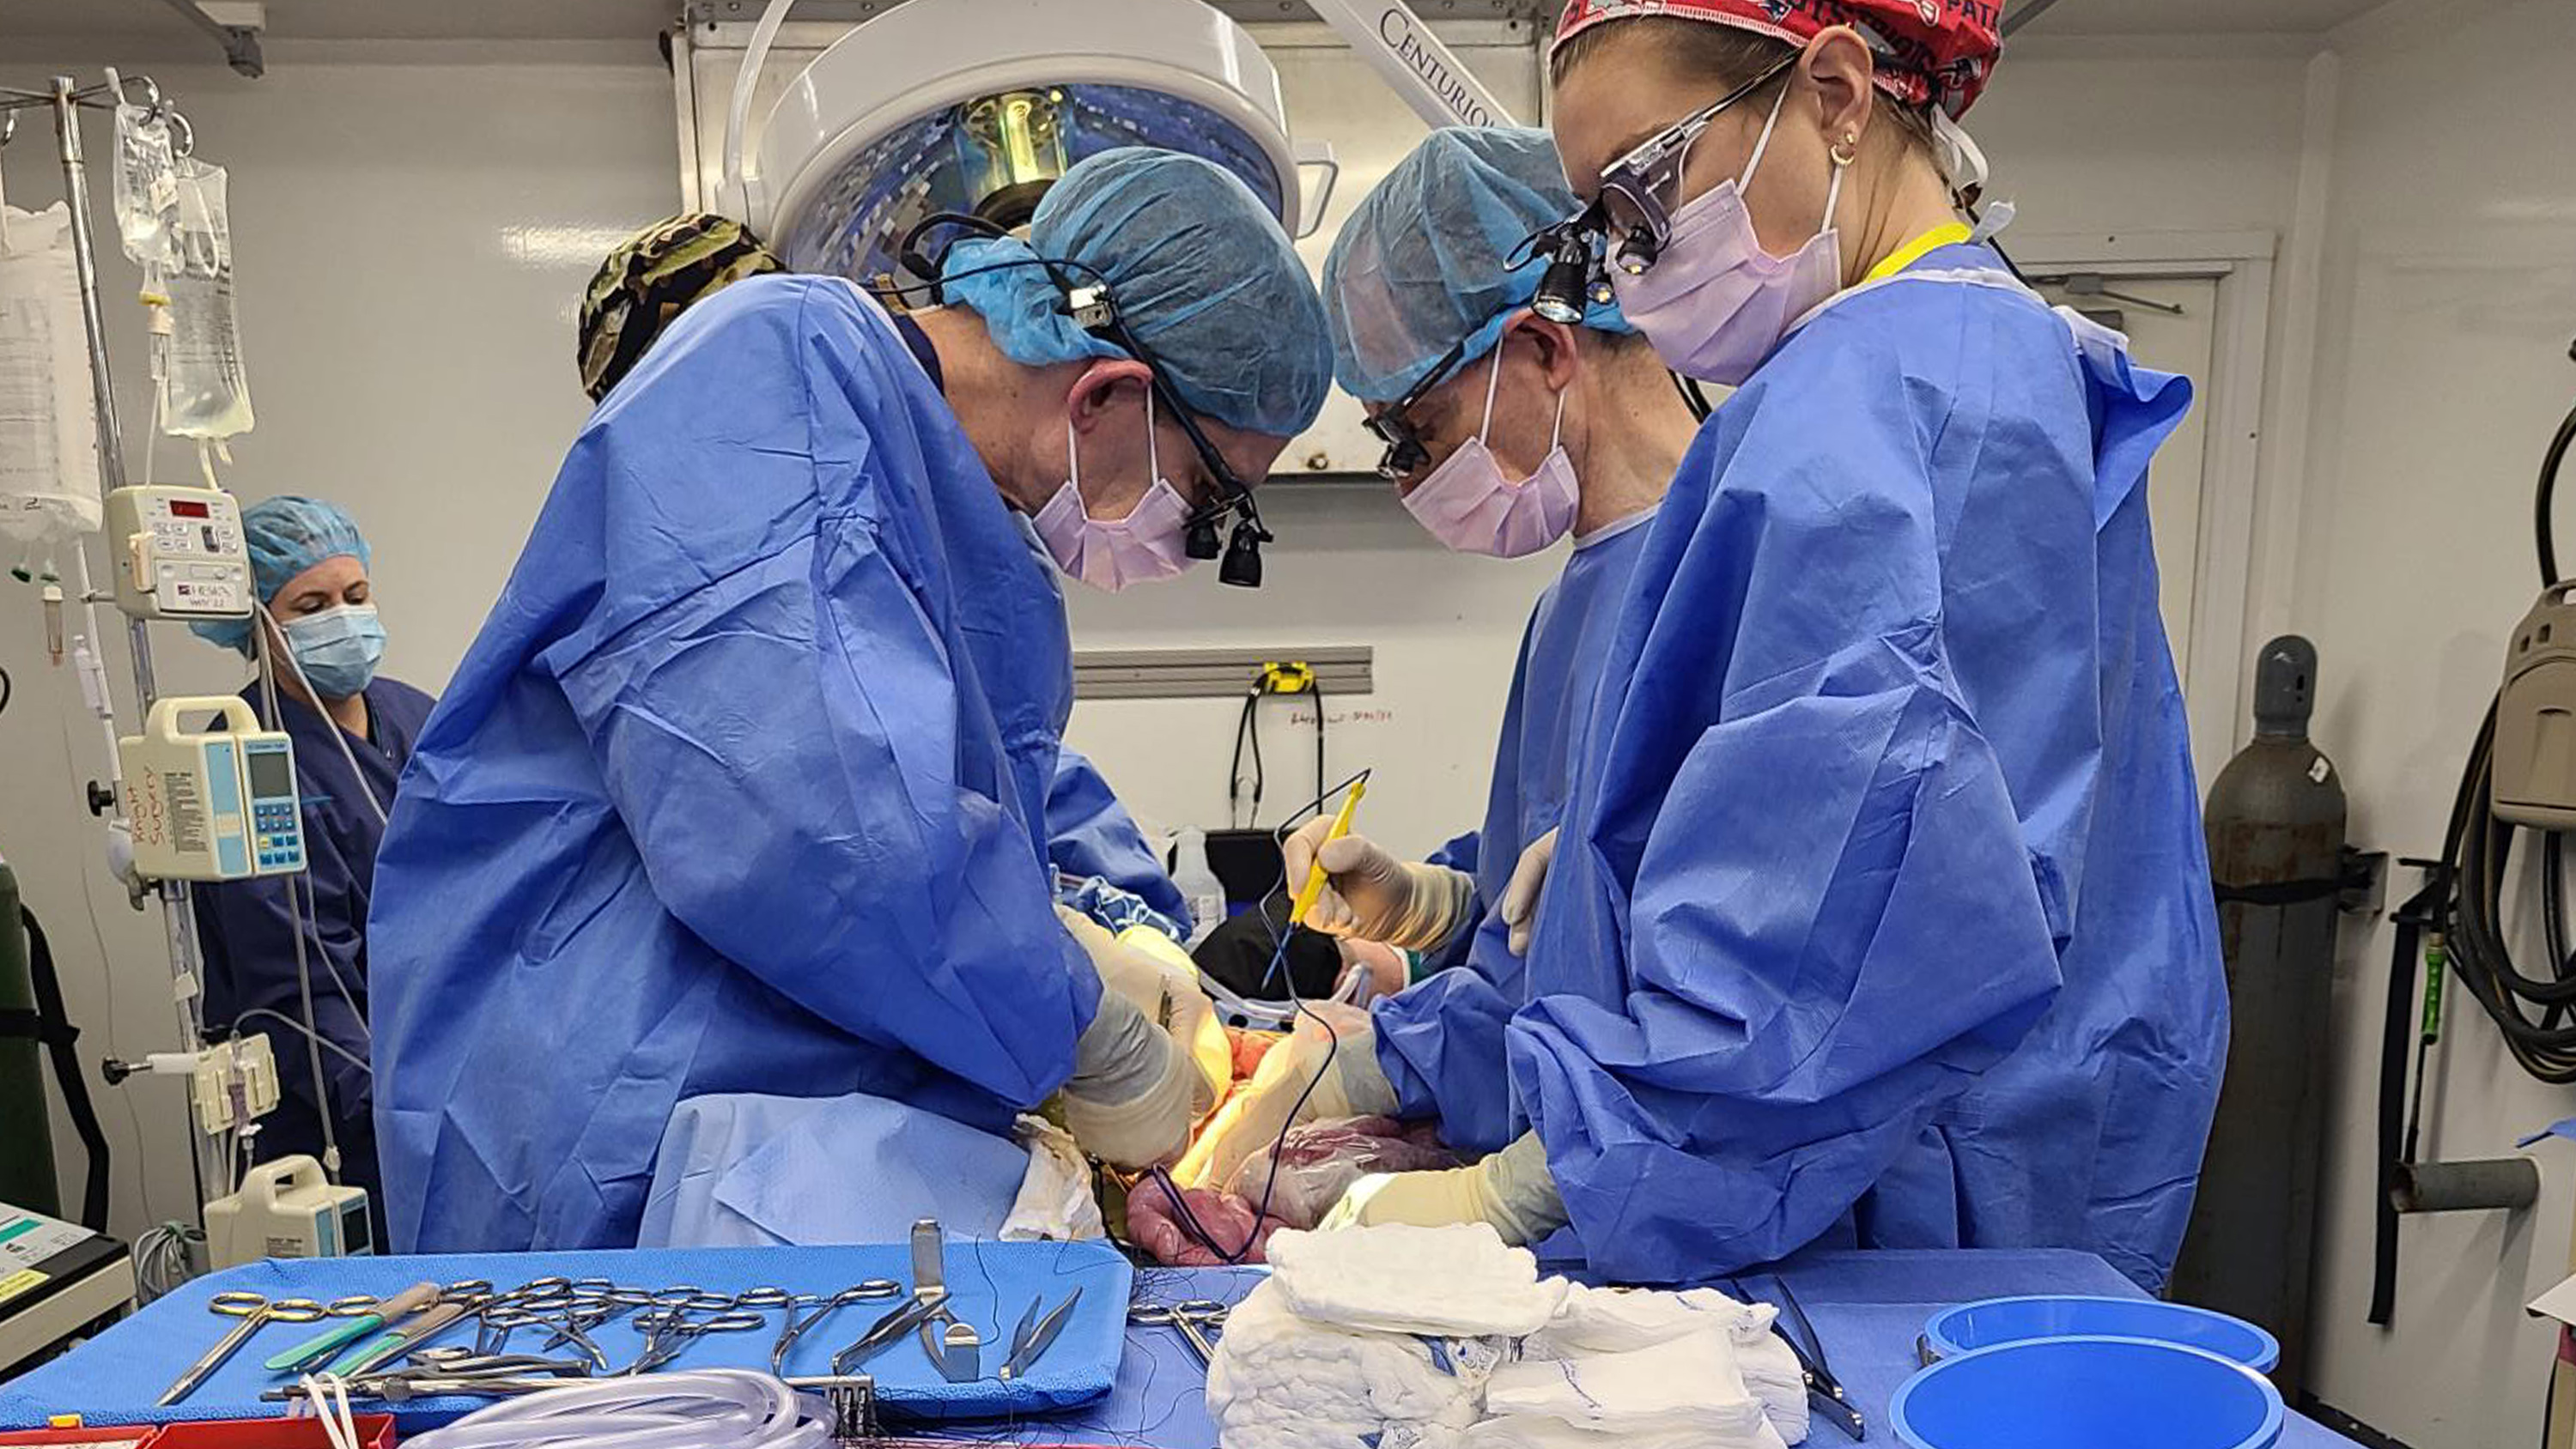 Four surgeons hovered over an operating table.